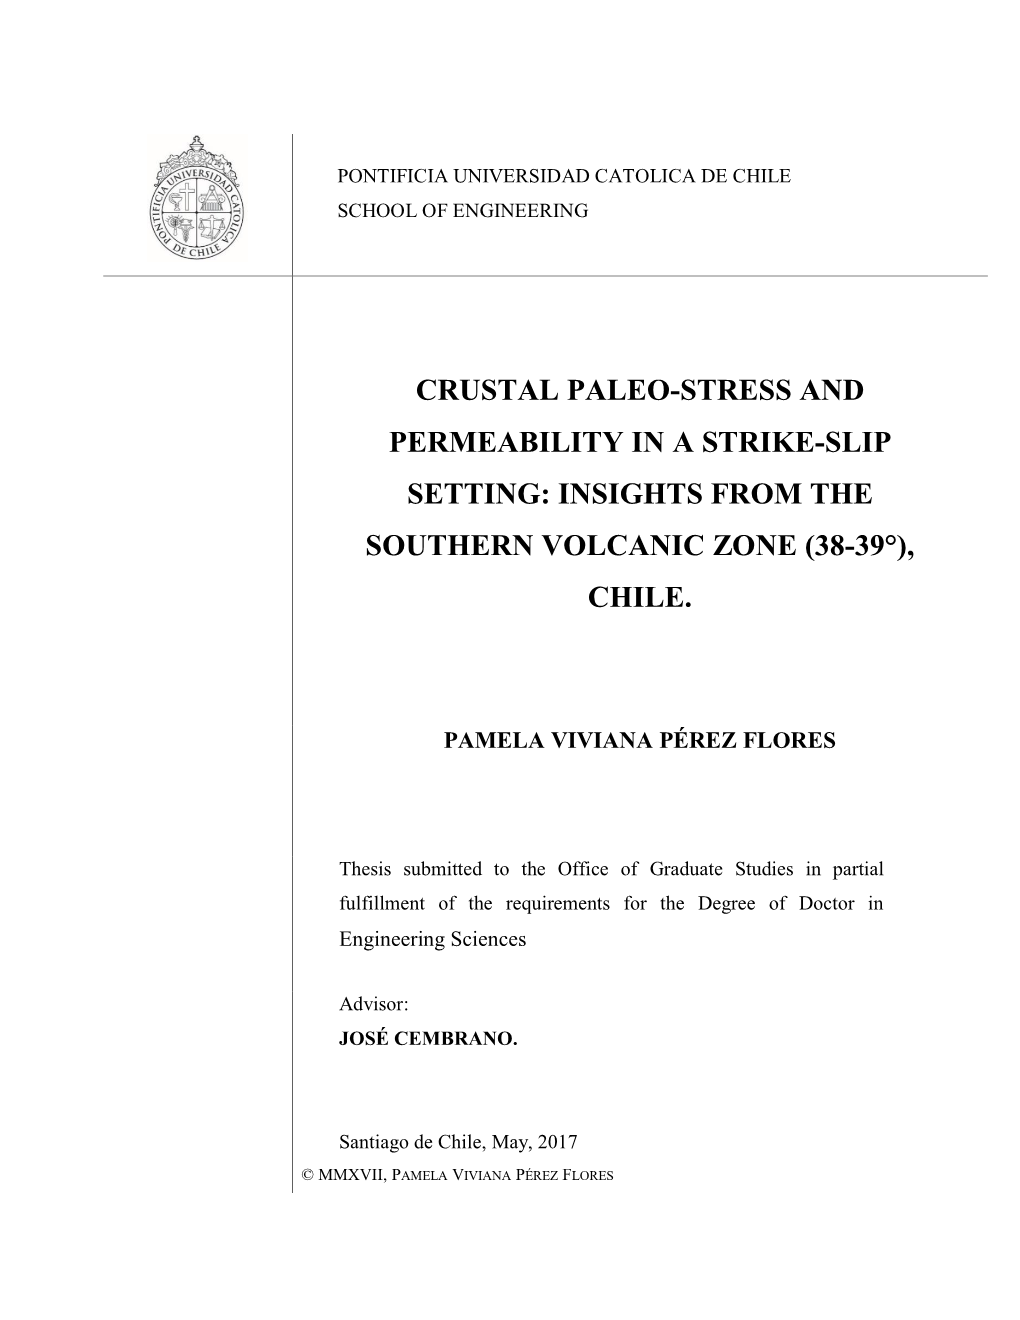 Crustal Paleo-Stress and Permeability in a Strike-Slip Setting: Insights from The